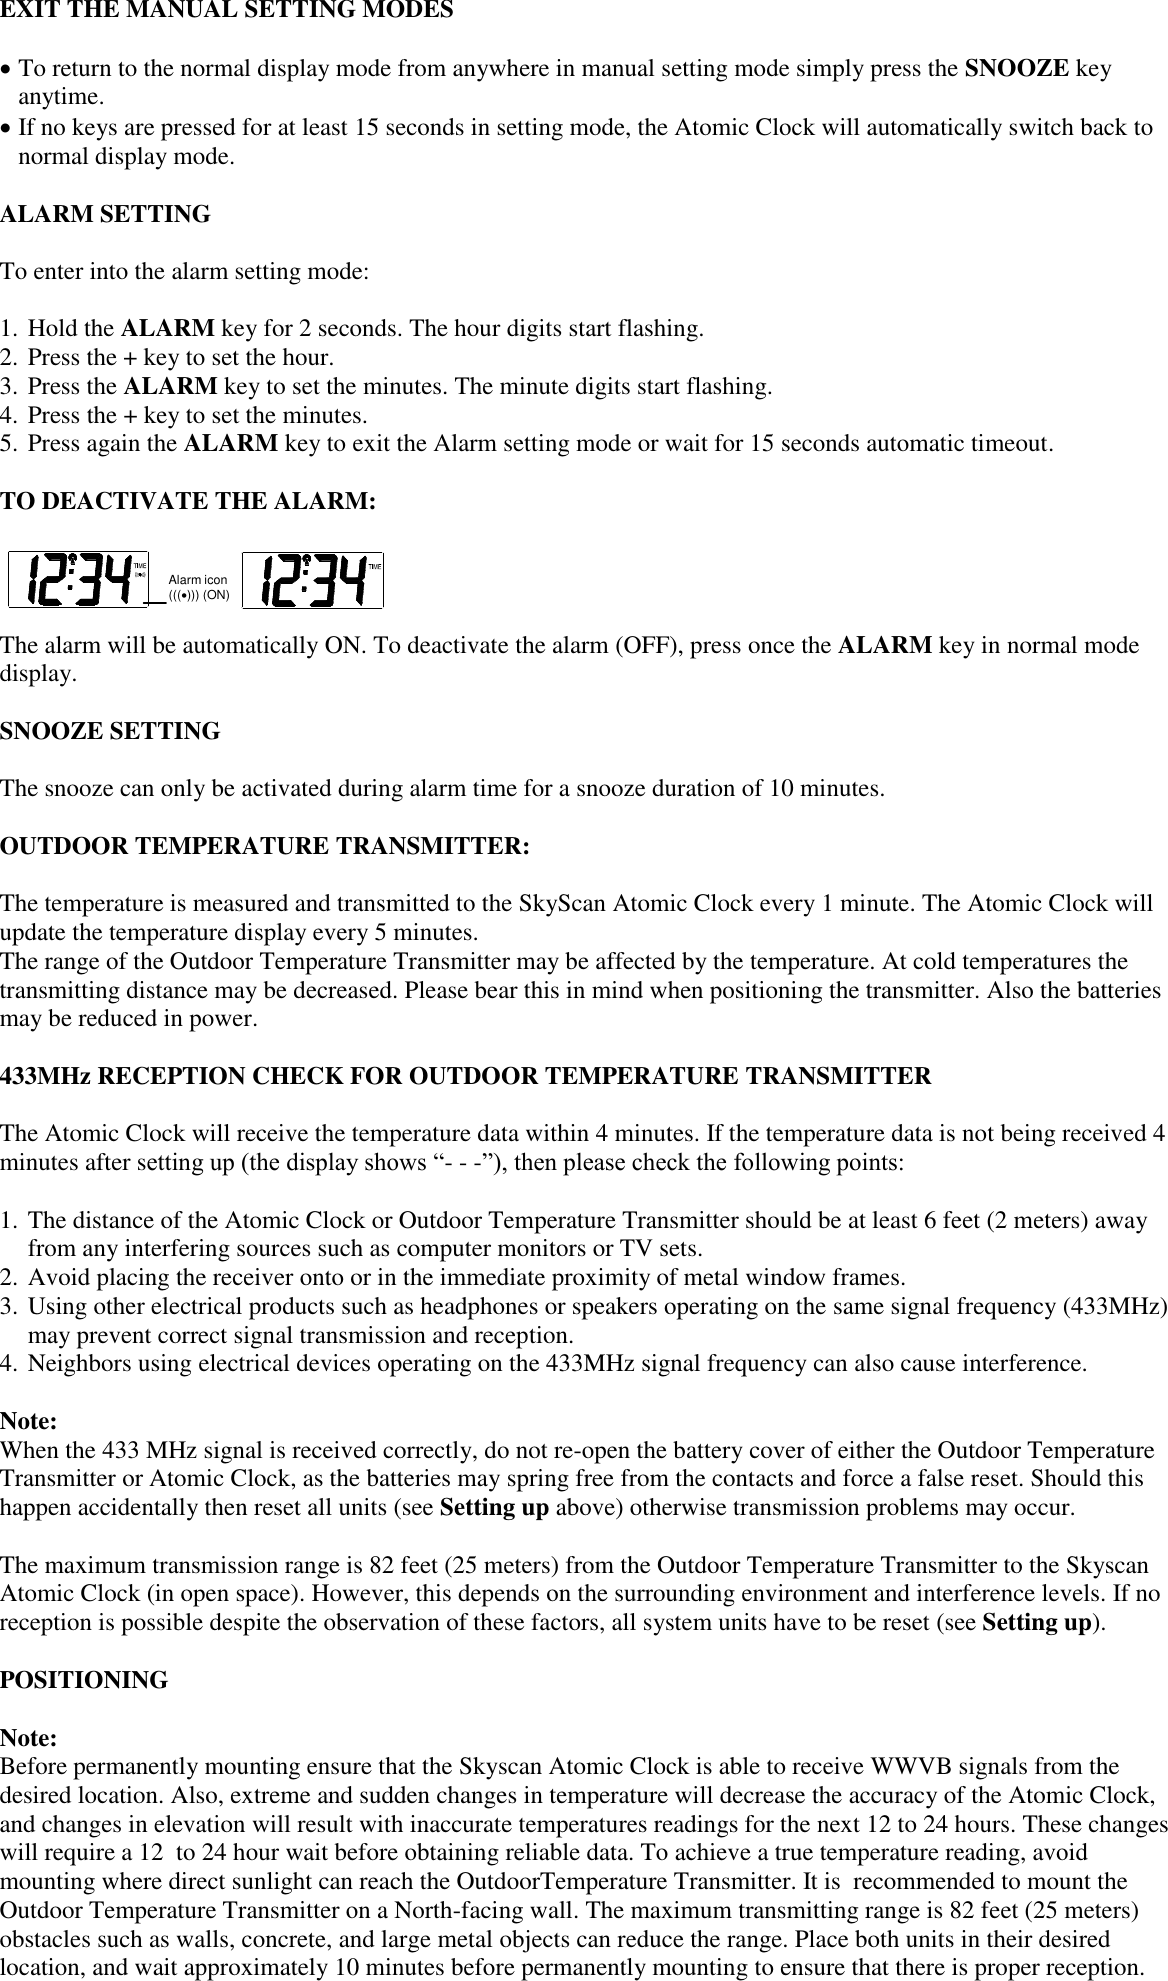 Page 6 of 9 - Skyscan Skyscan-86722-Instruction-Manual- ATOMIC CLOCK WITH OUTDOOR WIRELESS TEMPERATURE  Skyscan-86722-instruction-manual